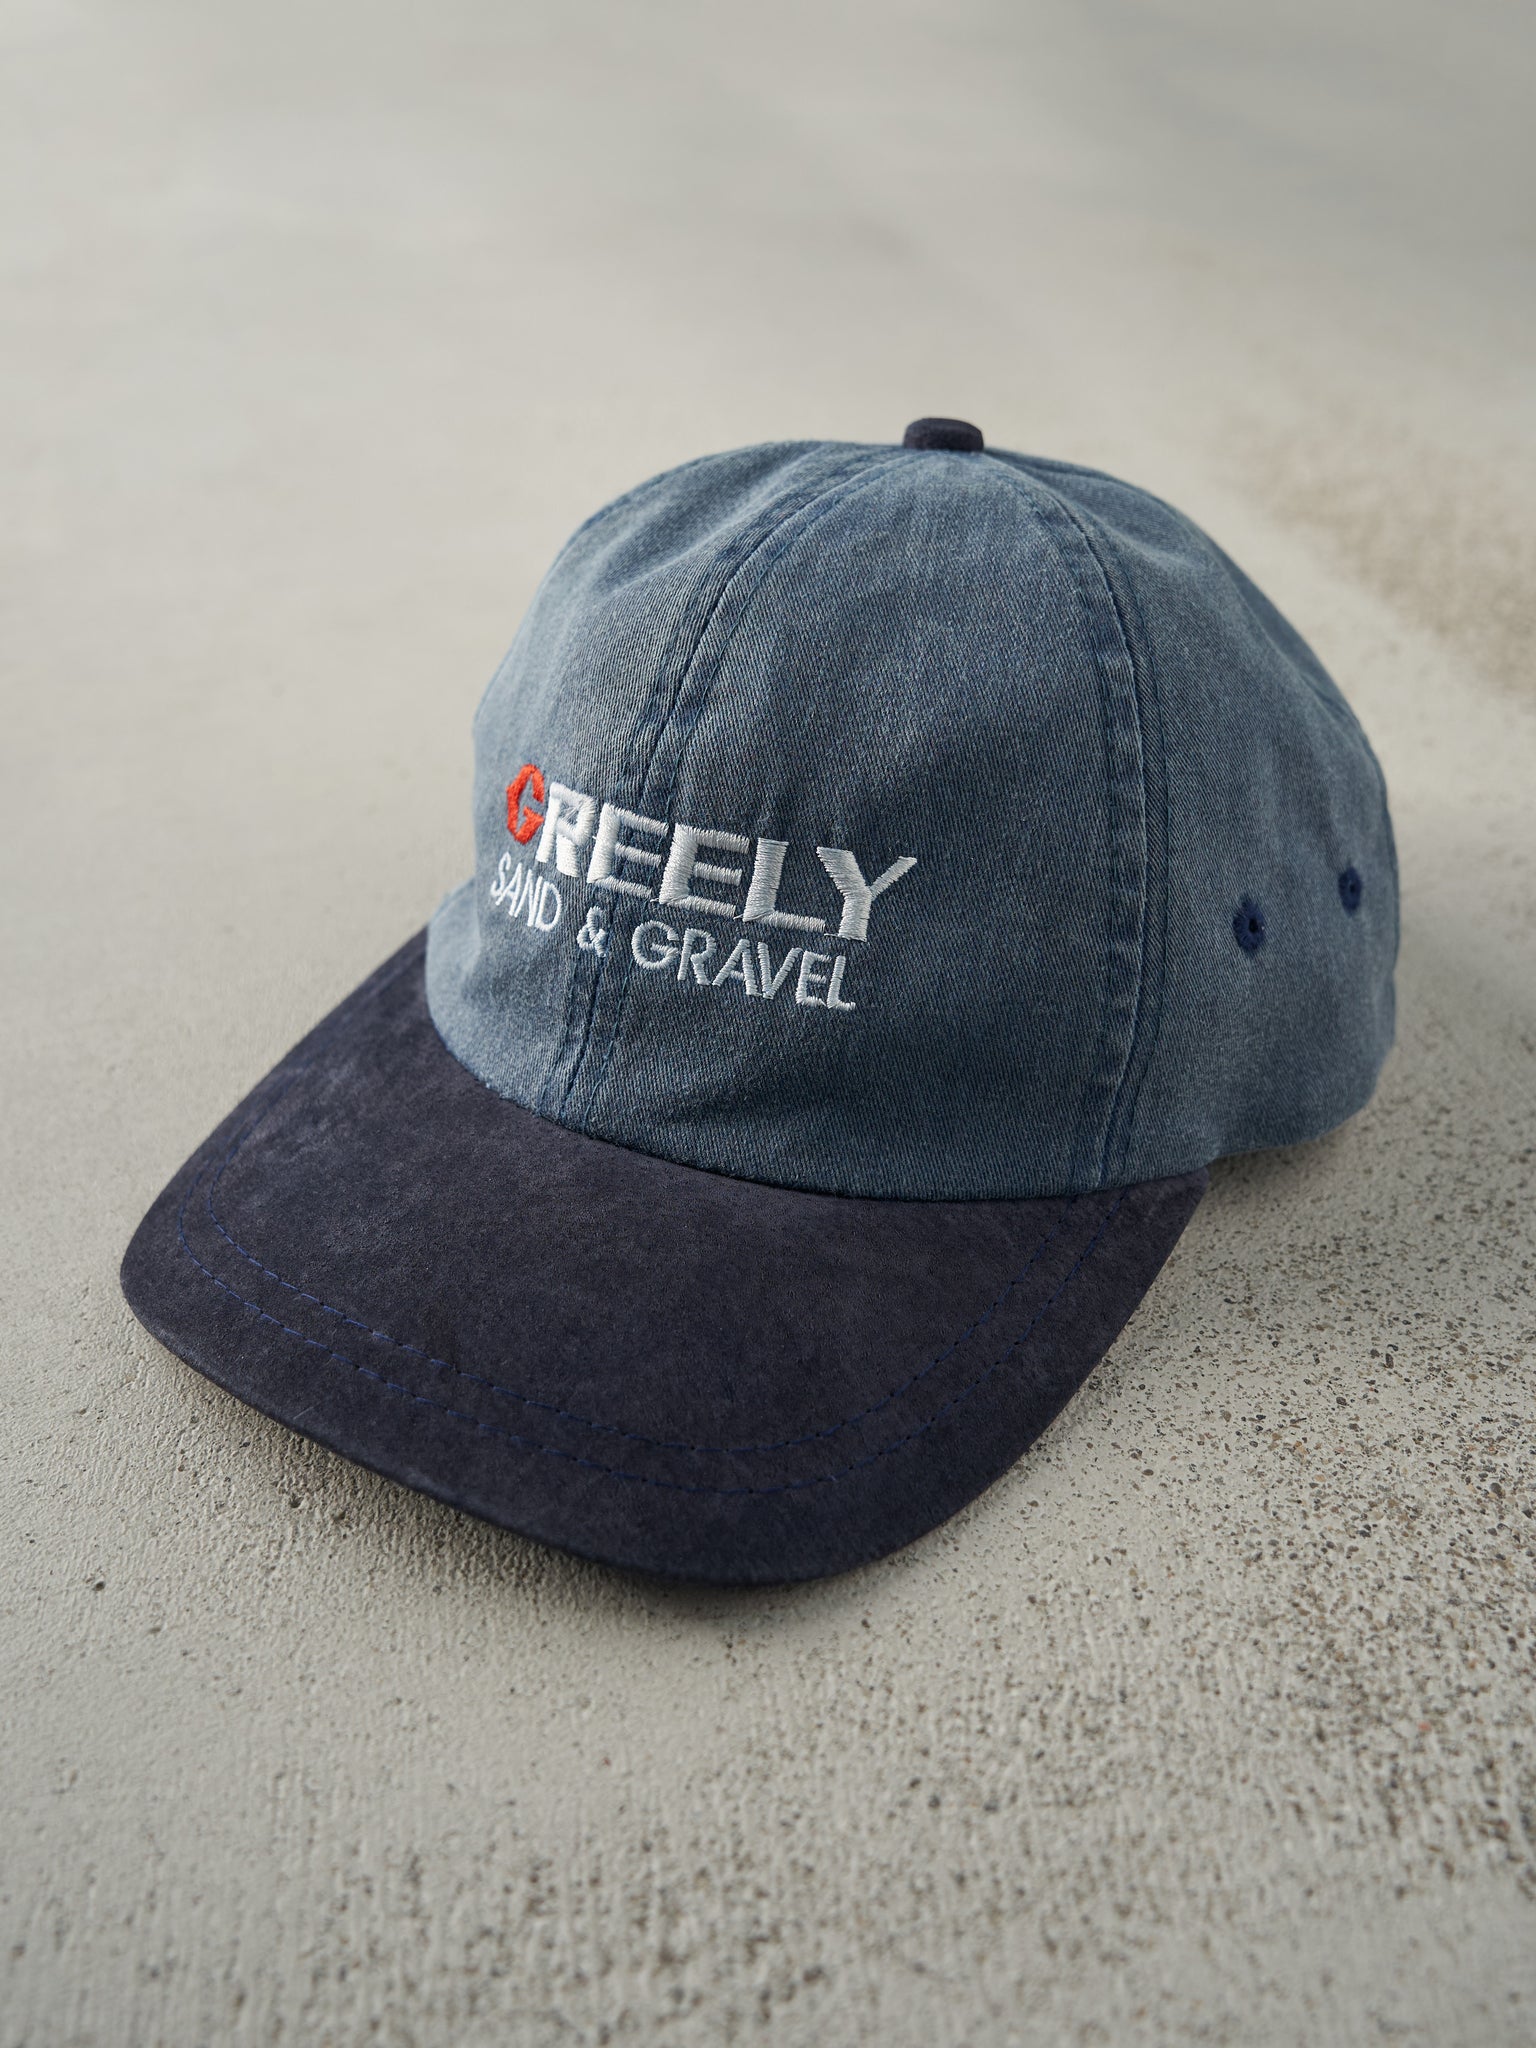 Vintage 90s Blue Two Tone & Suede Embroidered Greely Logo Strap Back Hat